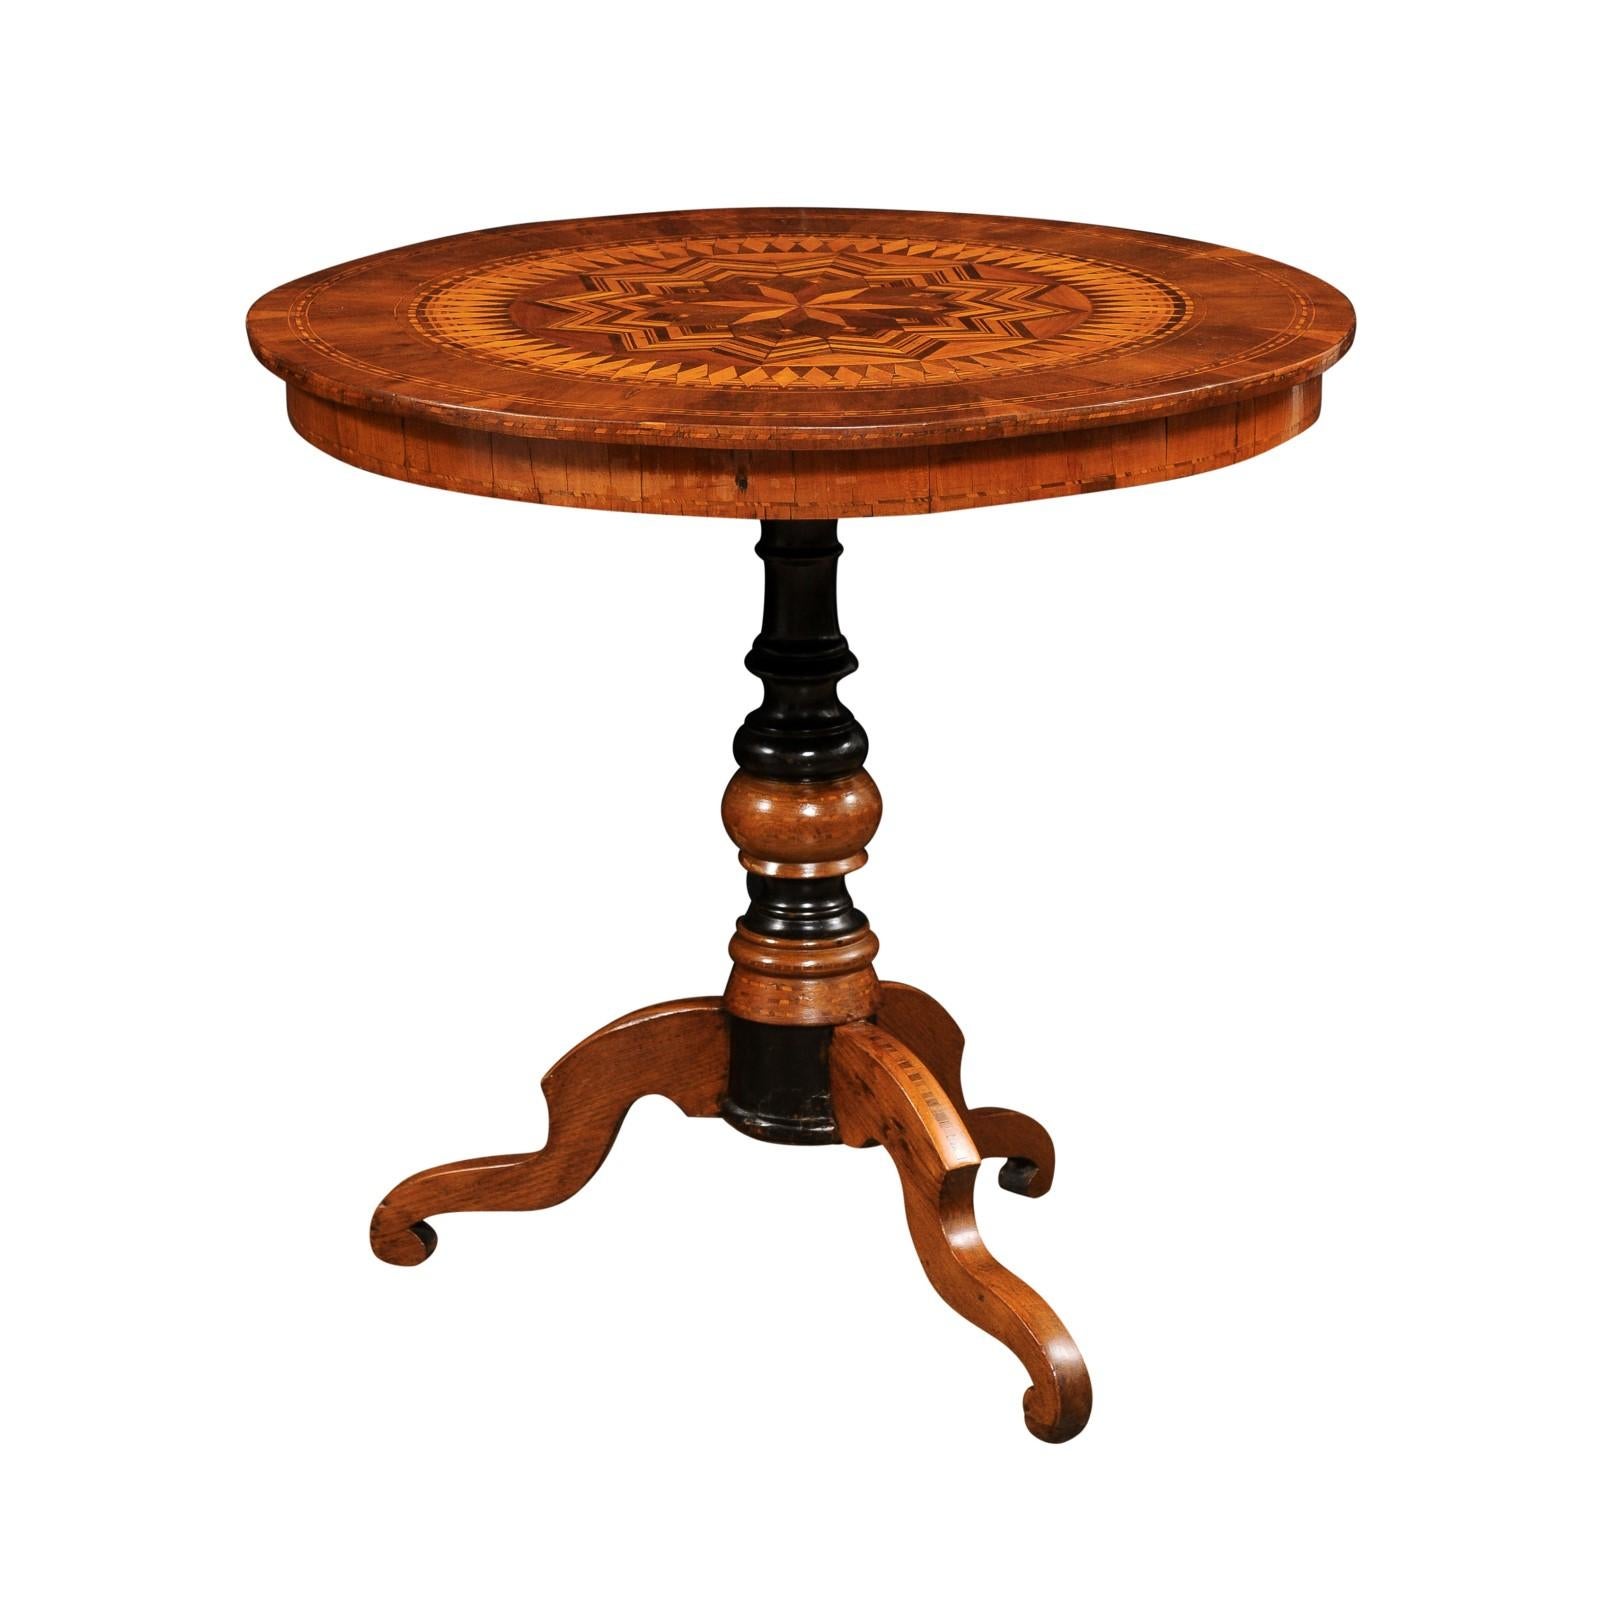 Italian 19th century marquetry walnut and birch center table with marquetry top, geometric motifs including radiating stars and diamonds. Exuding an air of timeless elegance, this Italian 19th century marquetry center table invites you to immerse